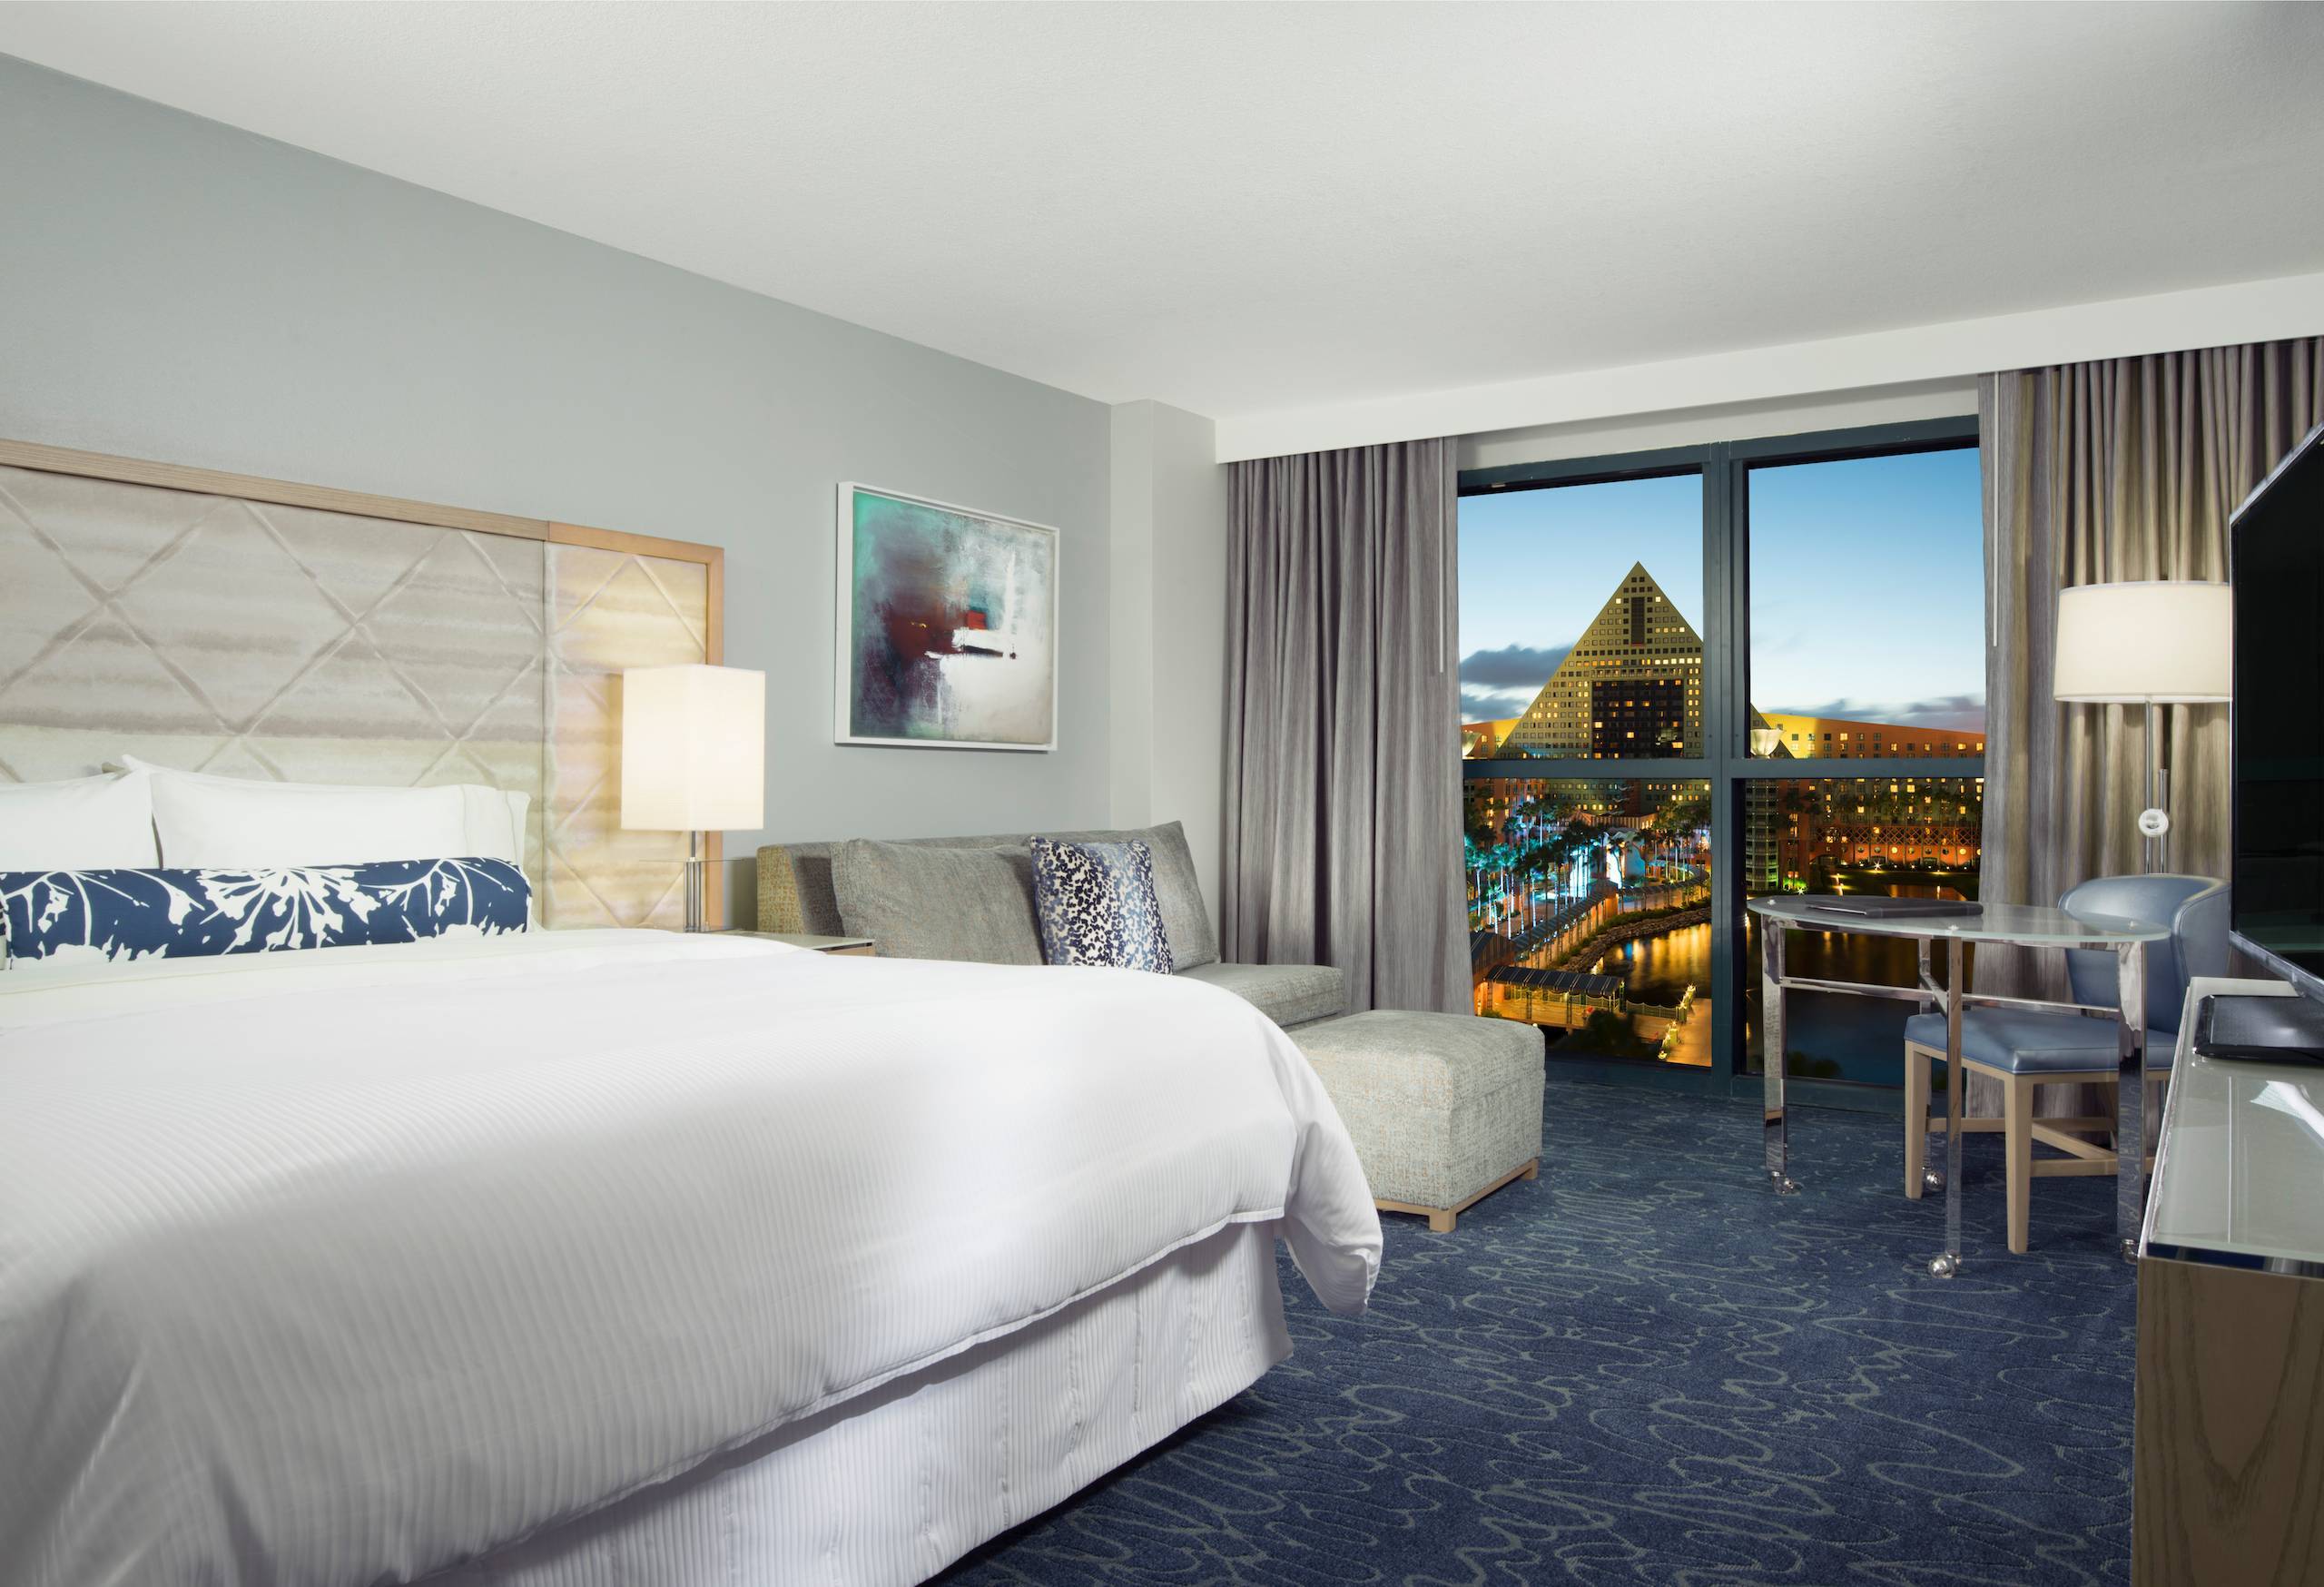 PHOTO - First look at the newly renovated Grand Deluxe Guest Rooms at the Walt Disney World Swan and Dolphin